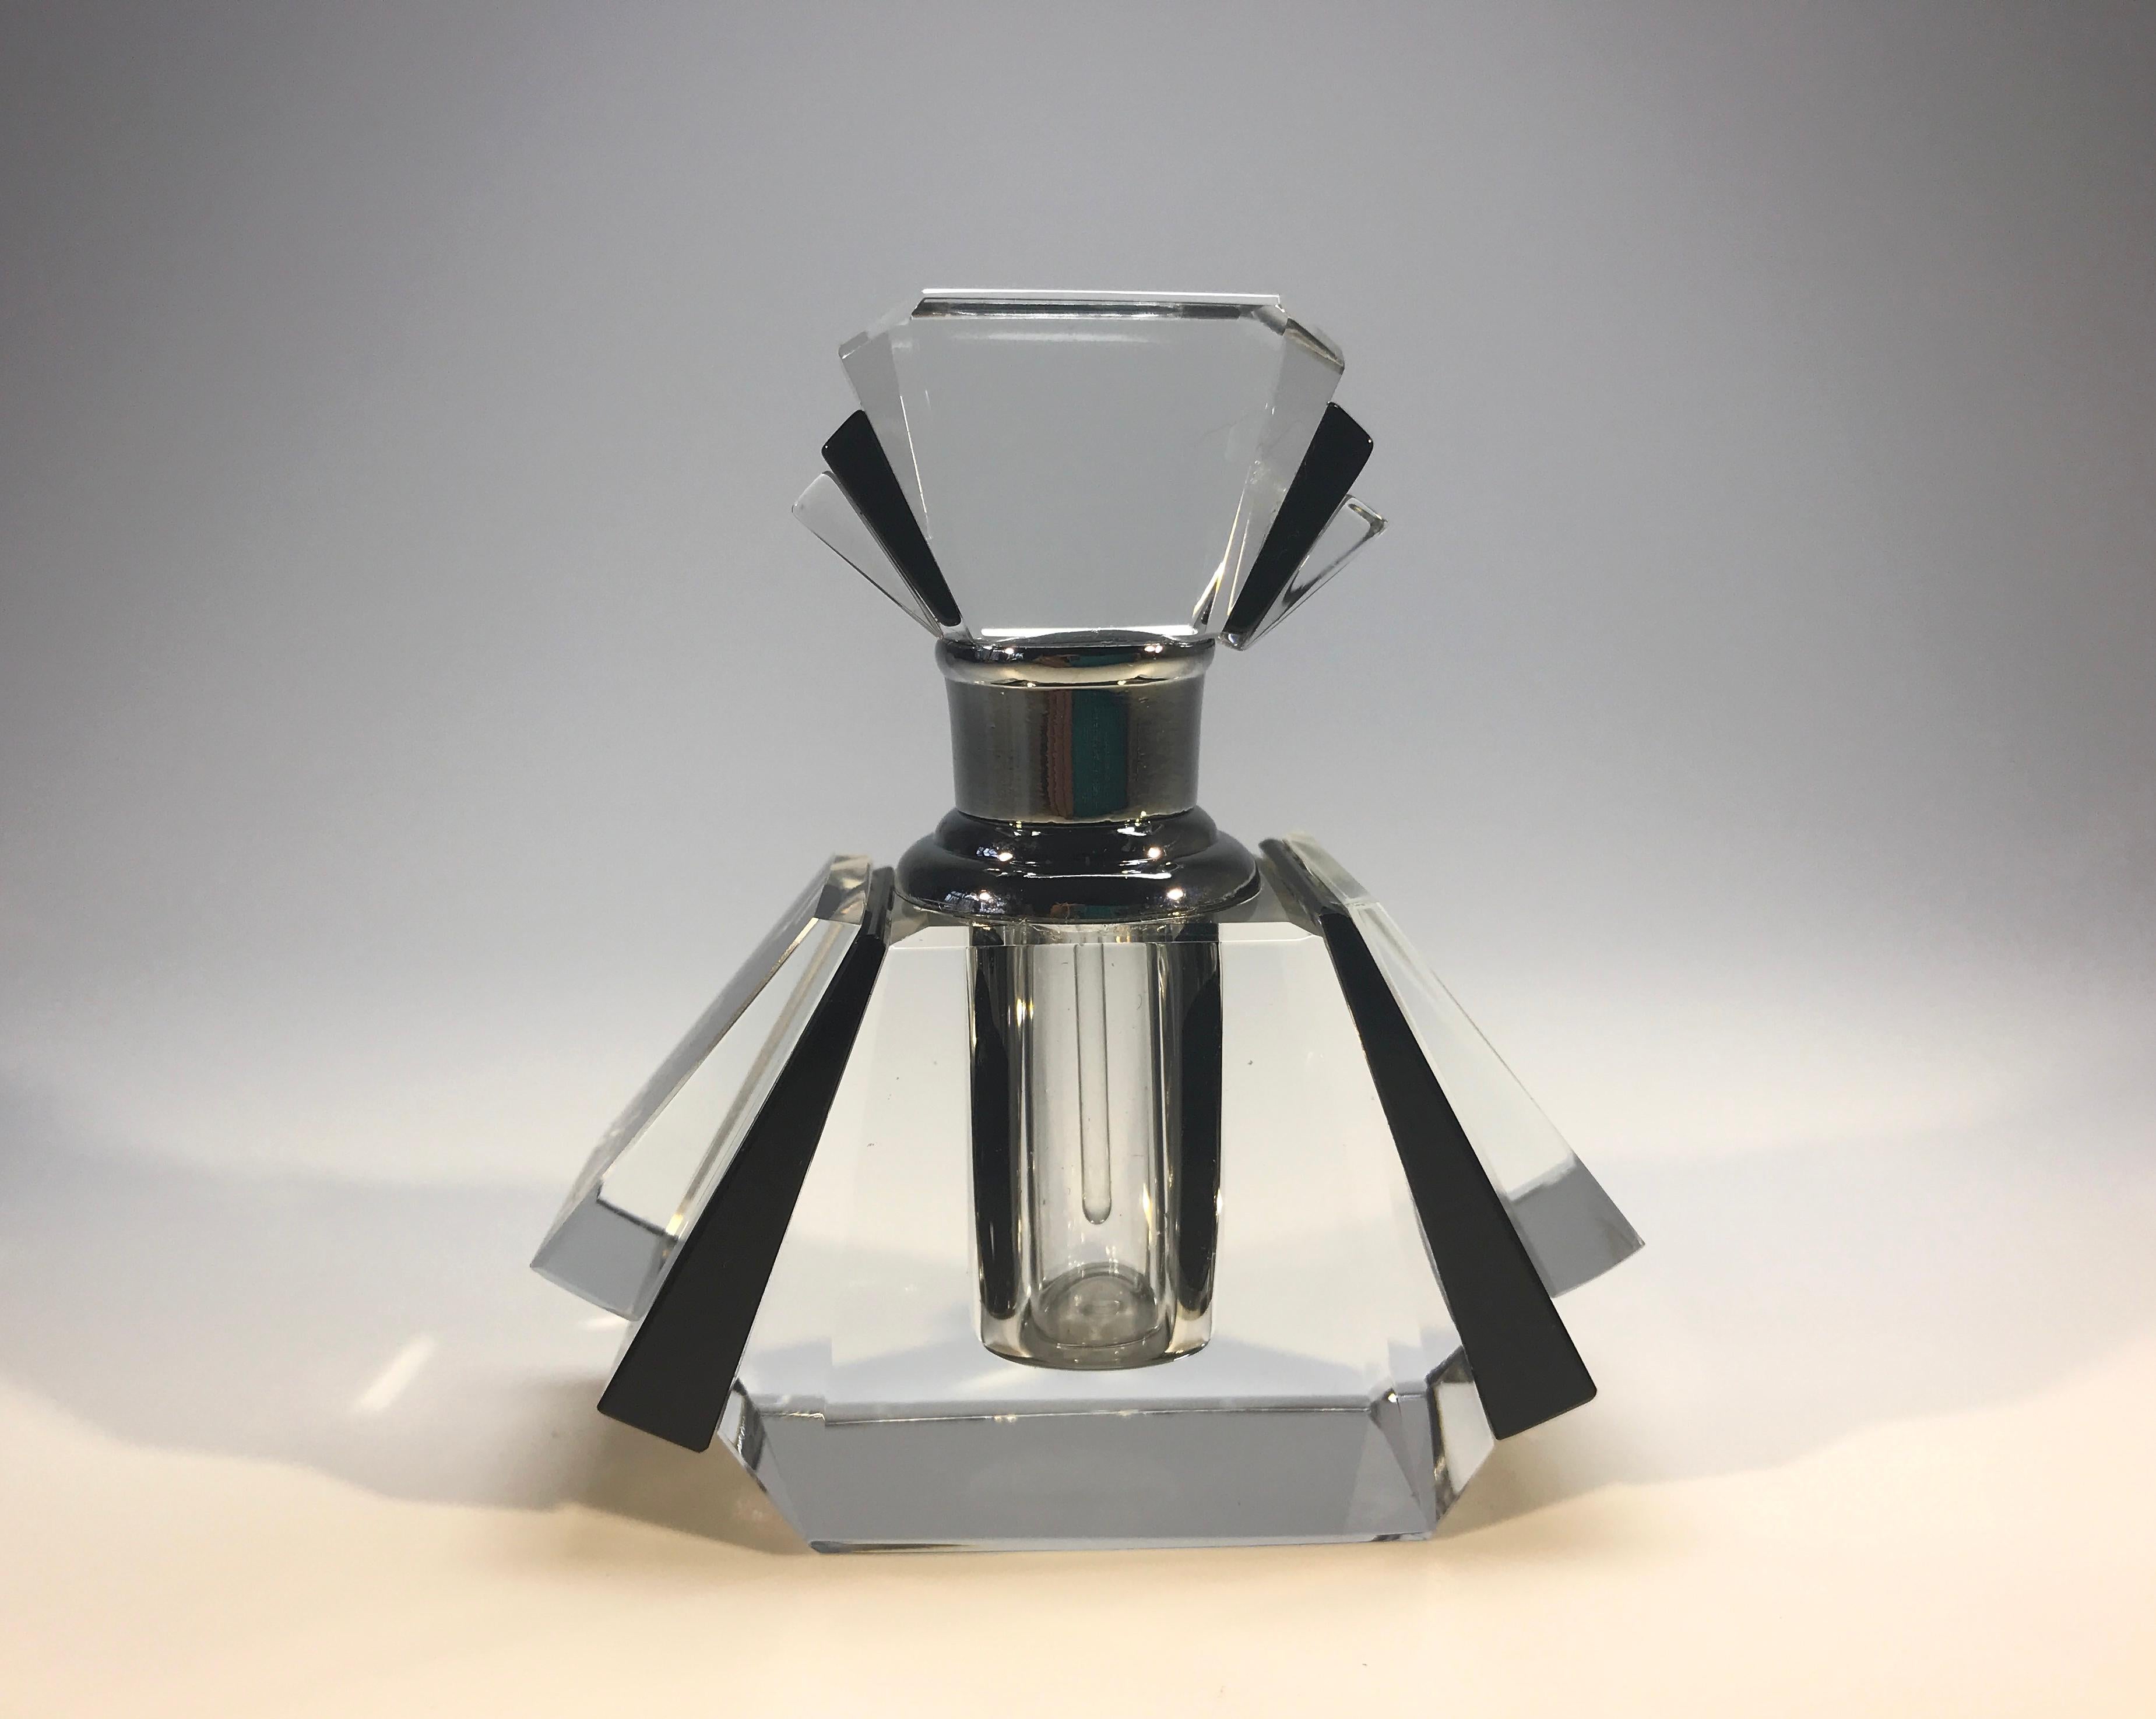 Diminutive Classic crystal perfume bottle in true Art Deco style
Geometric fan shaped clear crystal and black opaque glass
Silver colored collar. The glass pipet scent rod is in perfect condition
circa early 21st century
Measures: Height 3 inch,